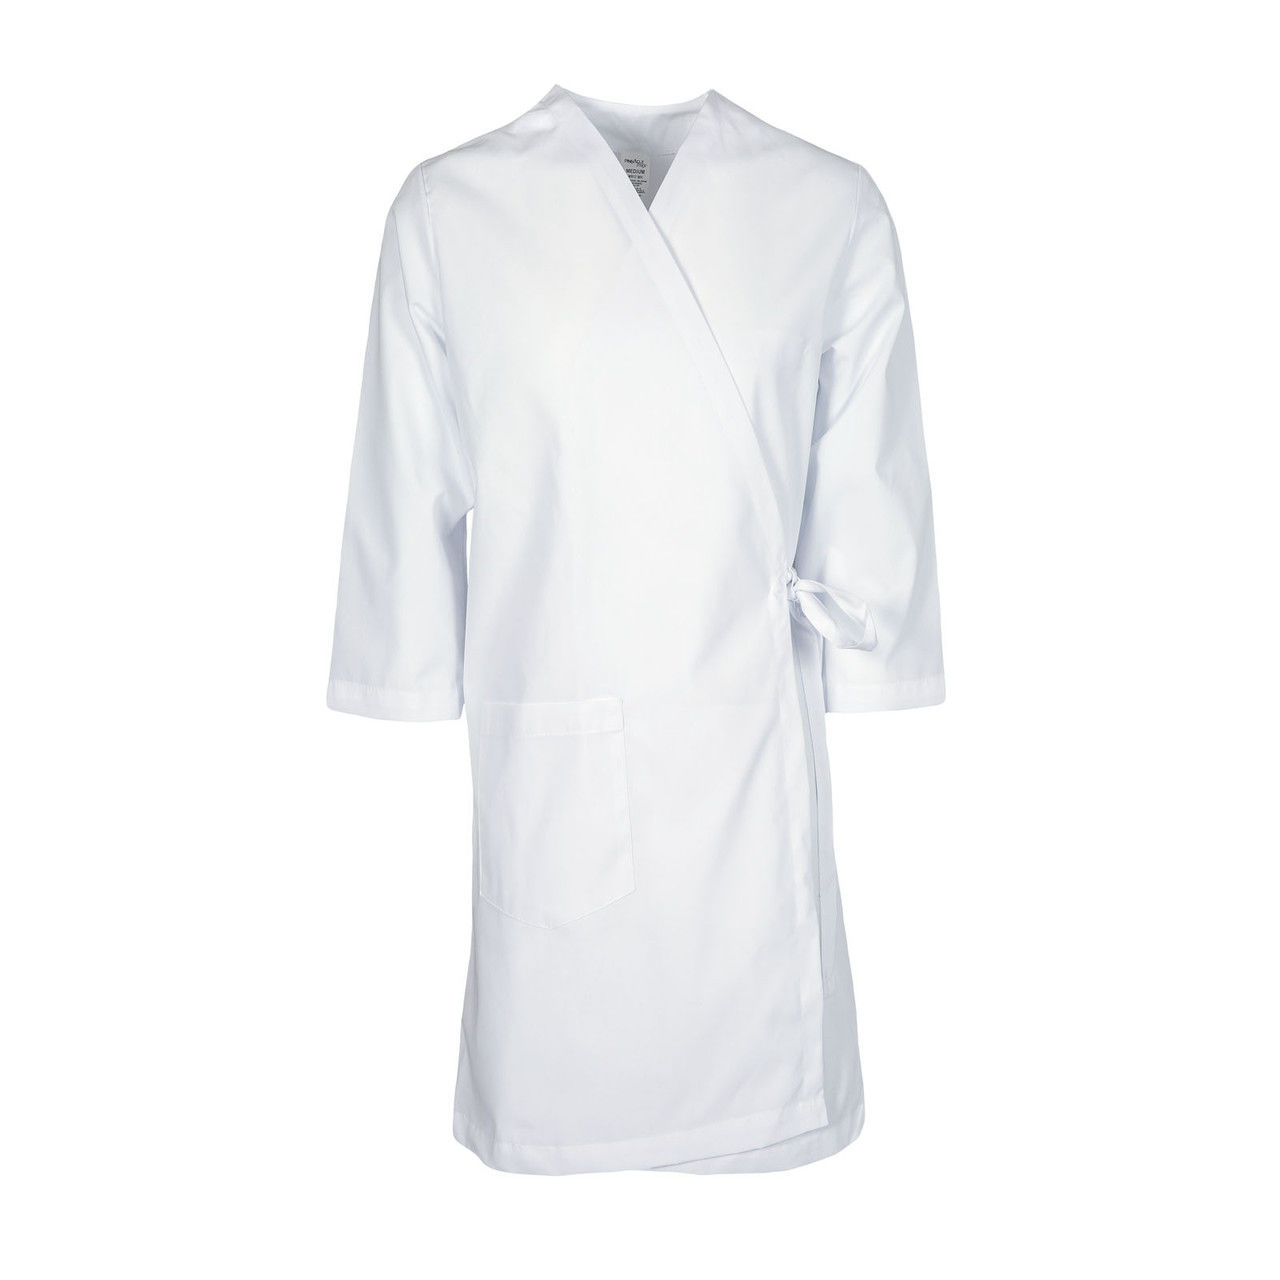 Can you list the features of the 3 Pocket White smock gown, also known as Wraparound Smock Gown?